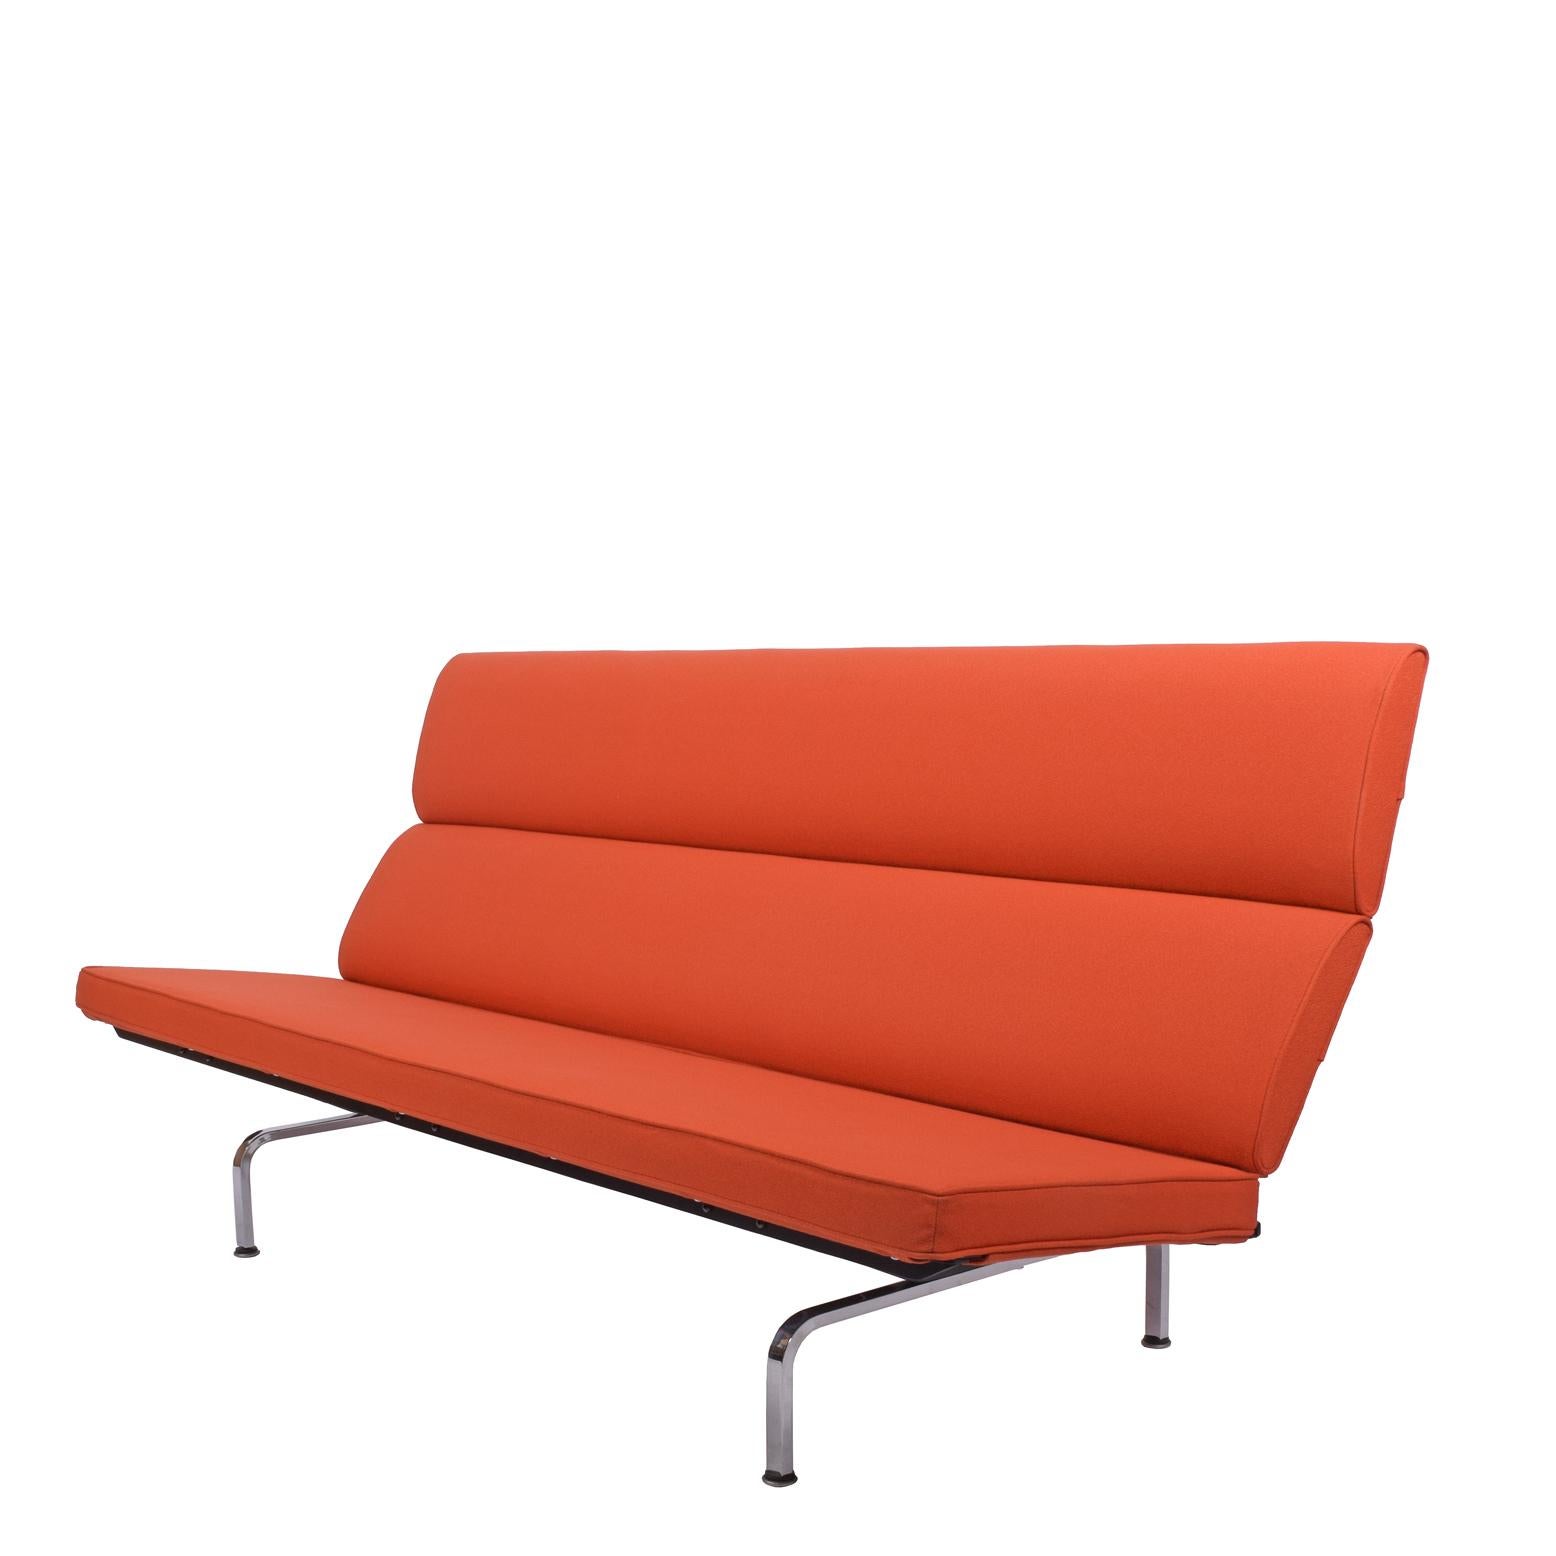 Folding sofa with two section back, metal brackets on polished chrome legs.
All glides intact. Made by Herman Miller.